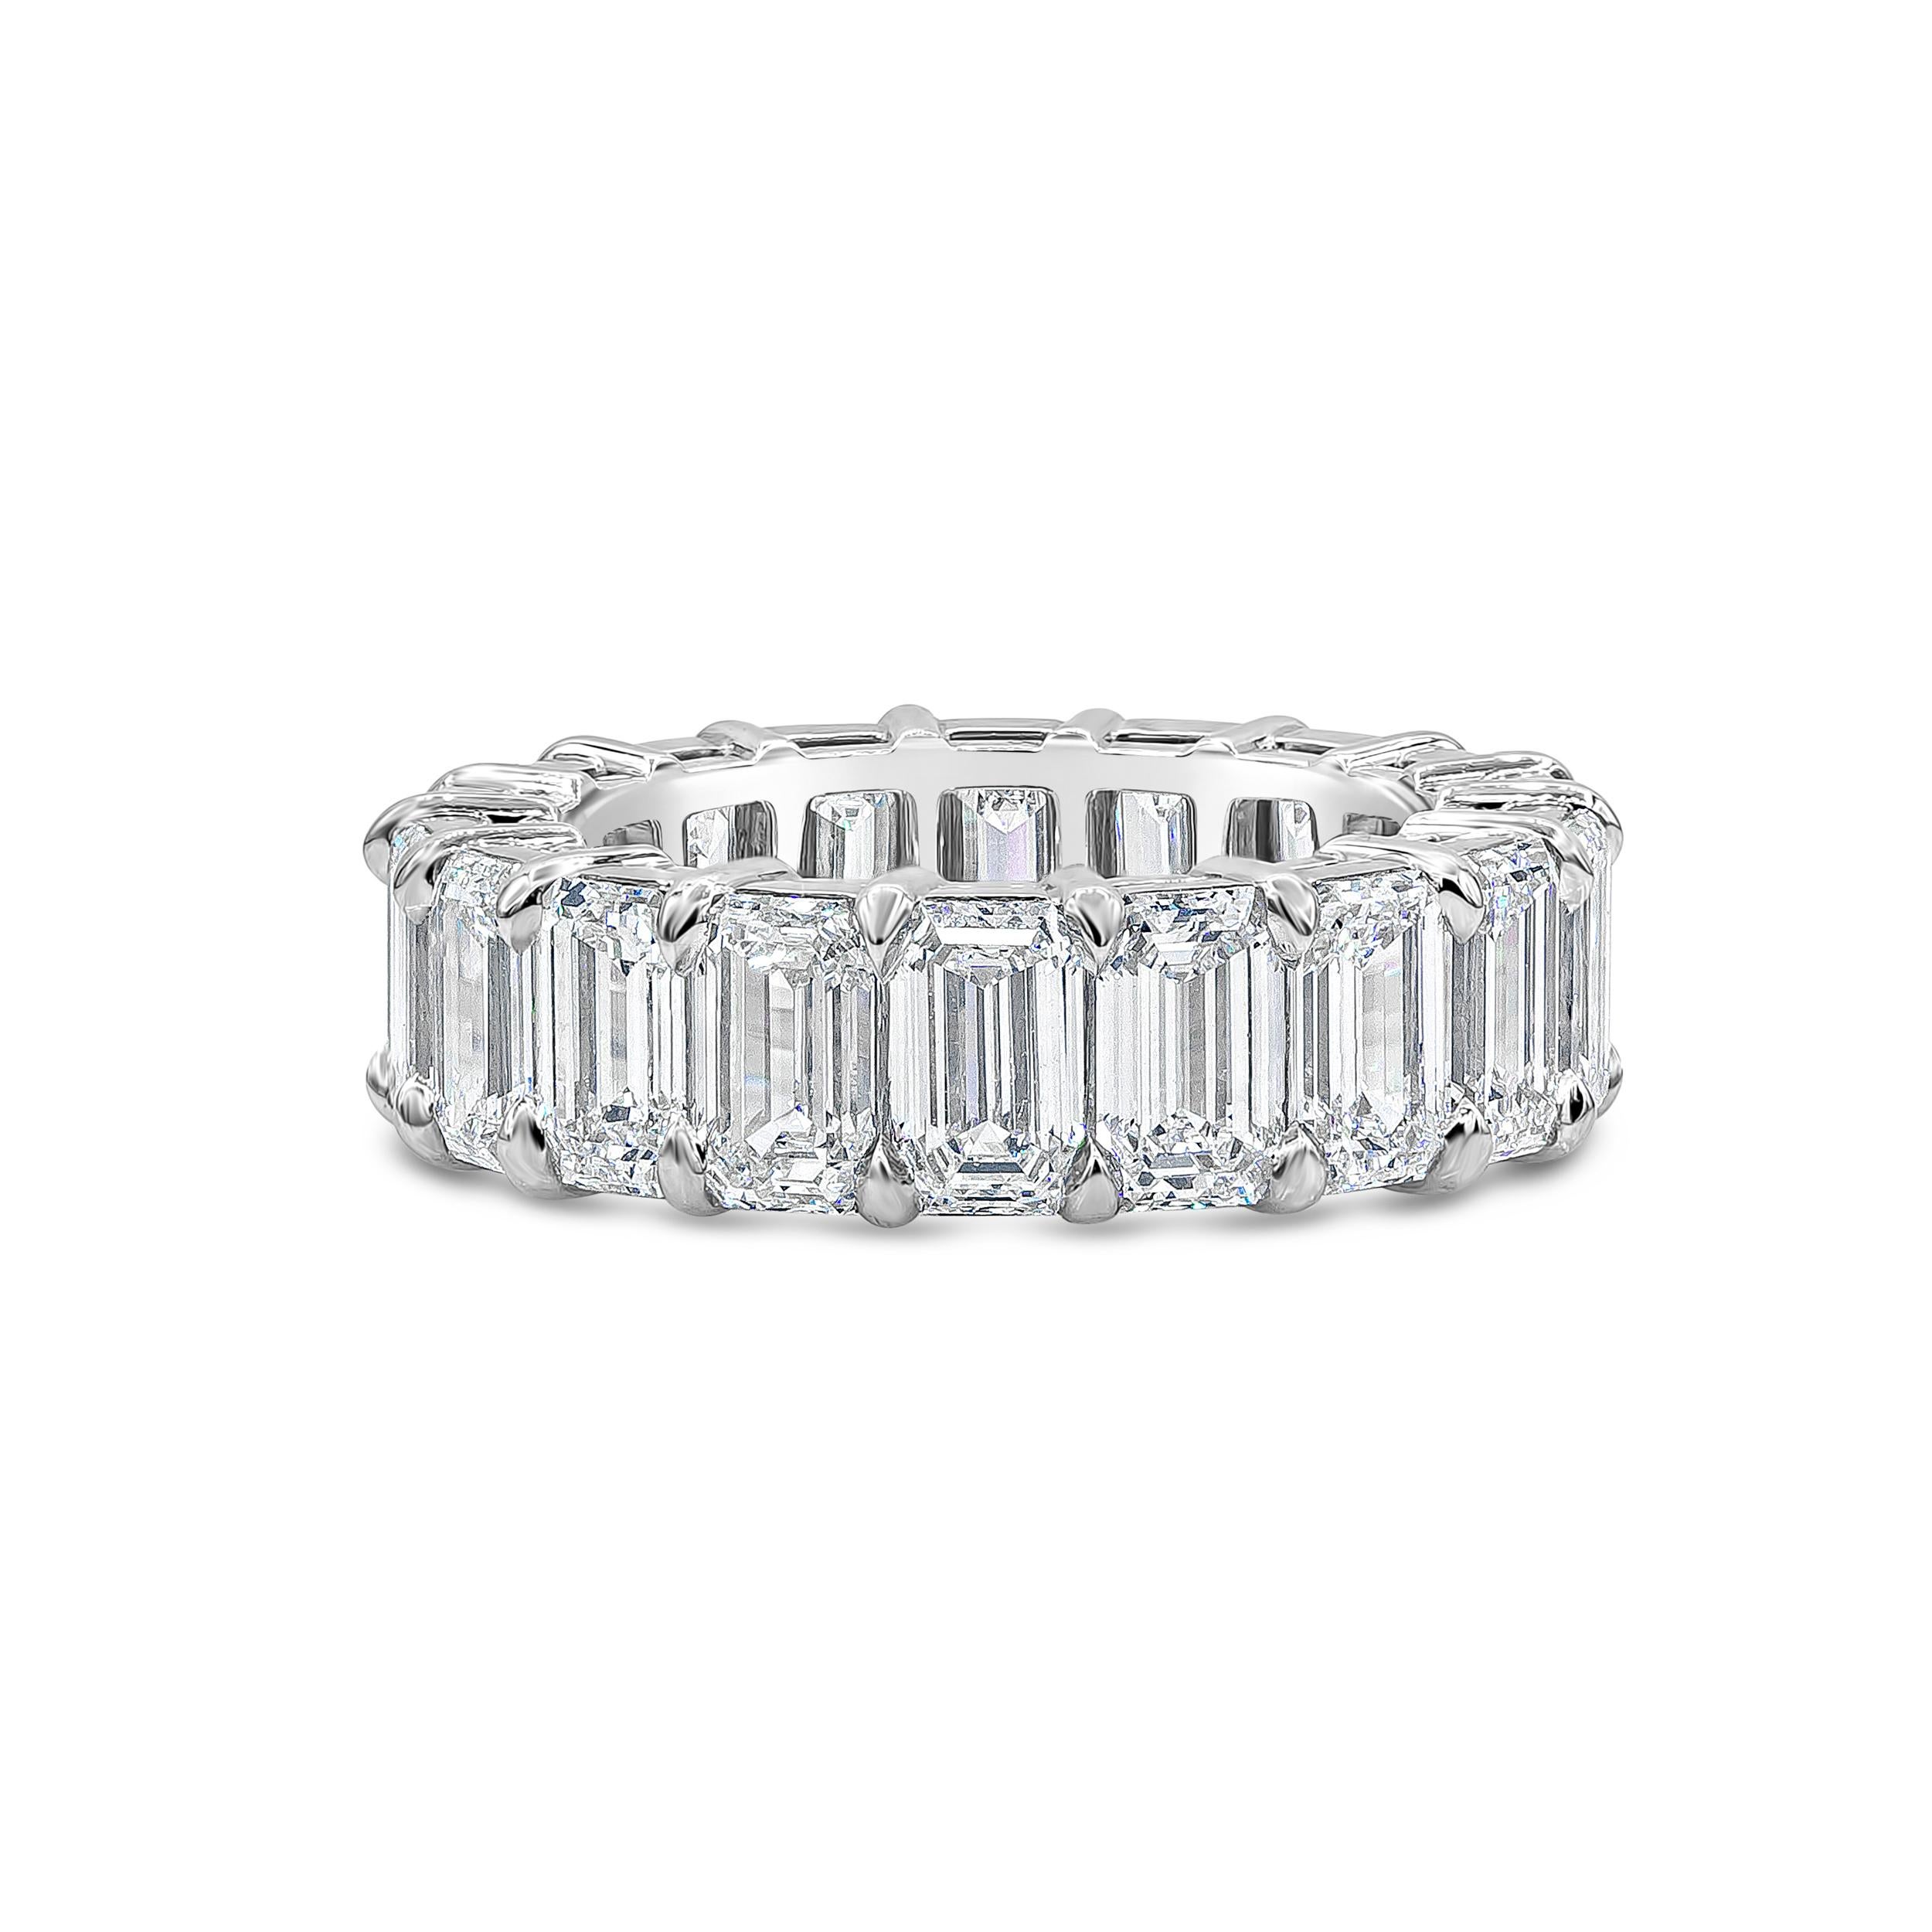 An amazing wedding band showcasing a row of emerald cut diamonds weighing 9.80 carats total, set in a polished platinum mounting. Diamonds are approximately E-F color, VS clarity. 

Style available in different price ranges. Prices are based on your